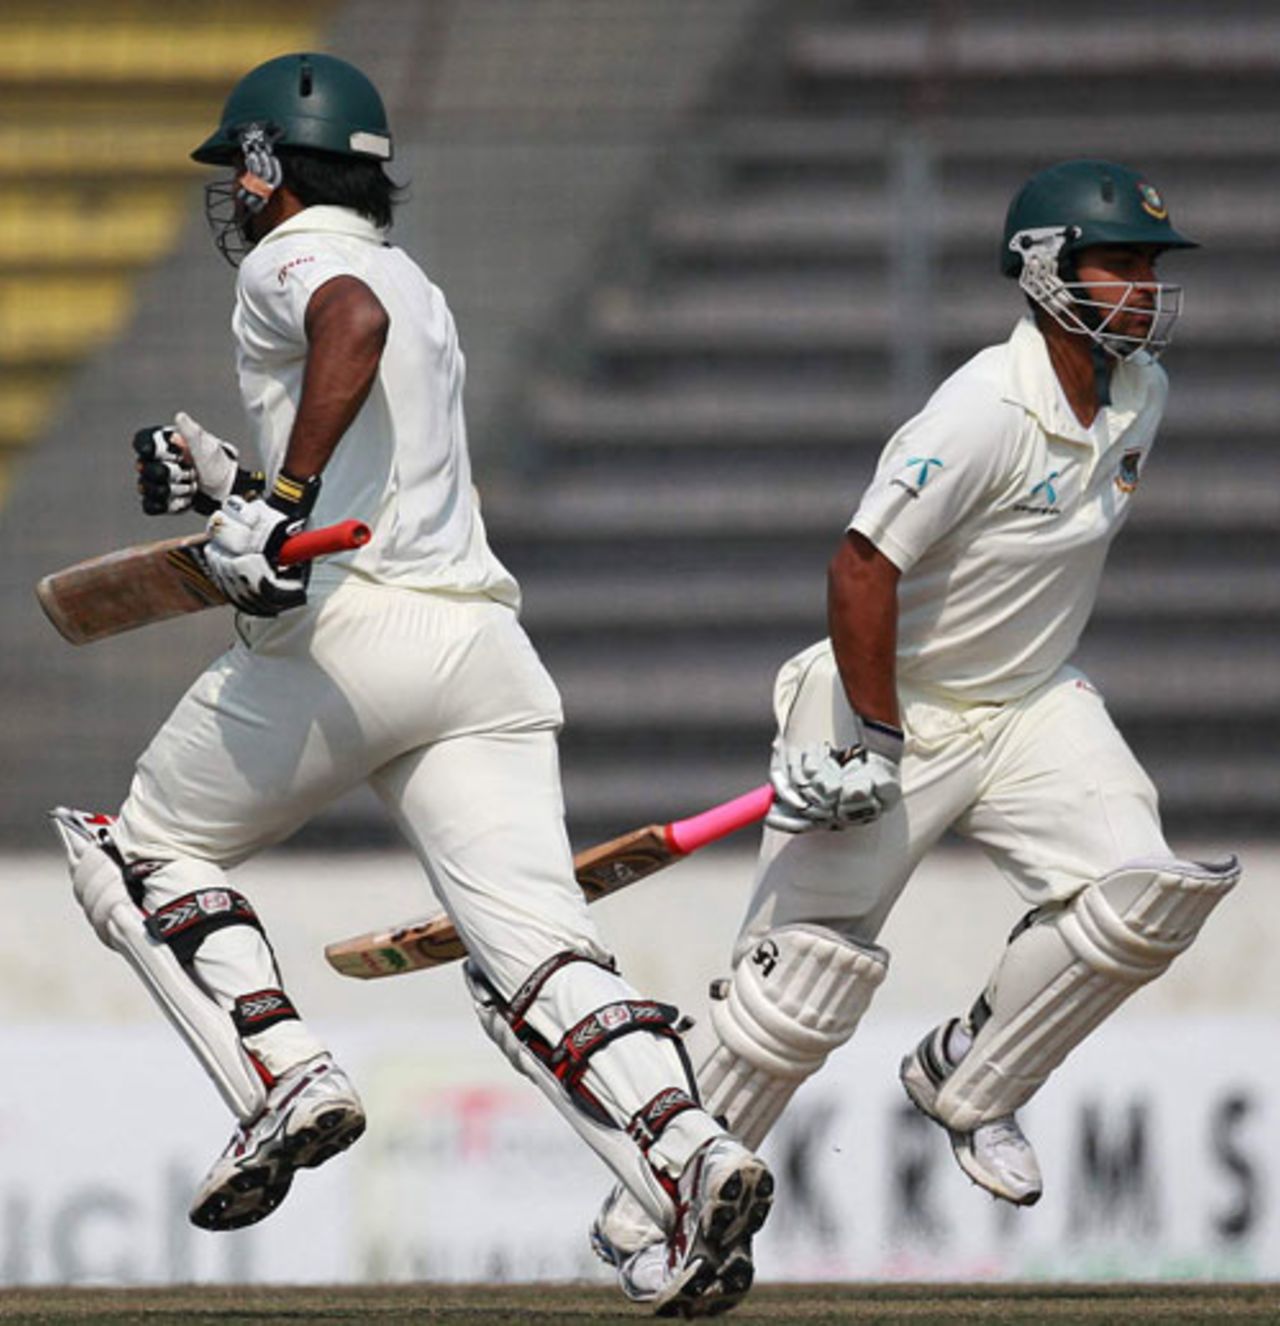 Tamim Iqbal and Junaid Siddique run across during their 200-run stand, Bangladesh v India, 2nd Test, Mirpur, 3rd day, January 26, 2010